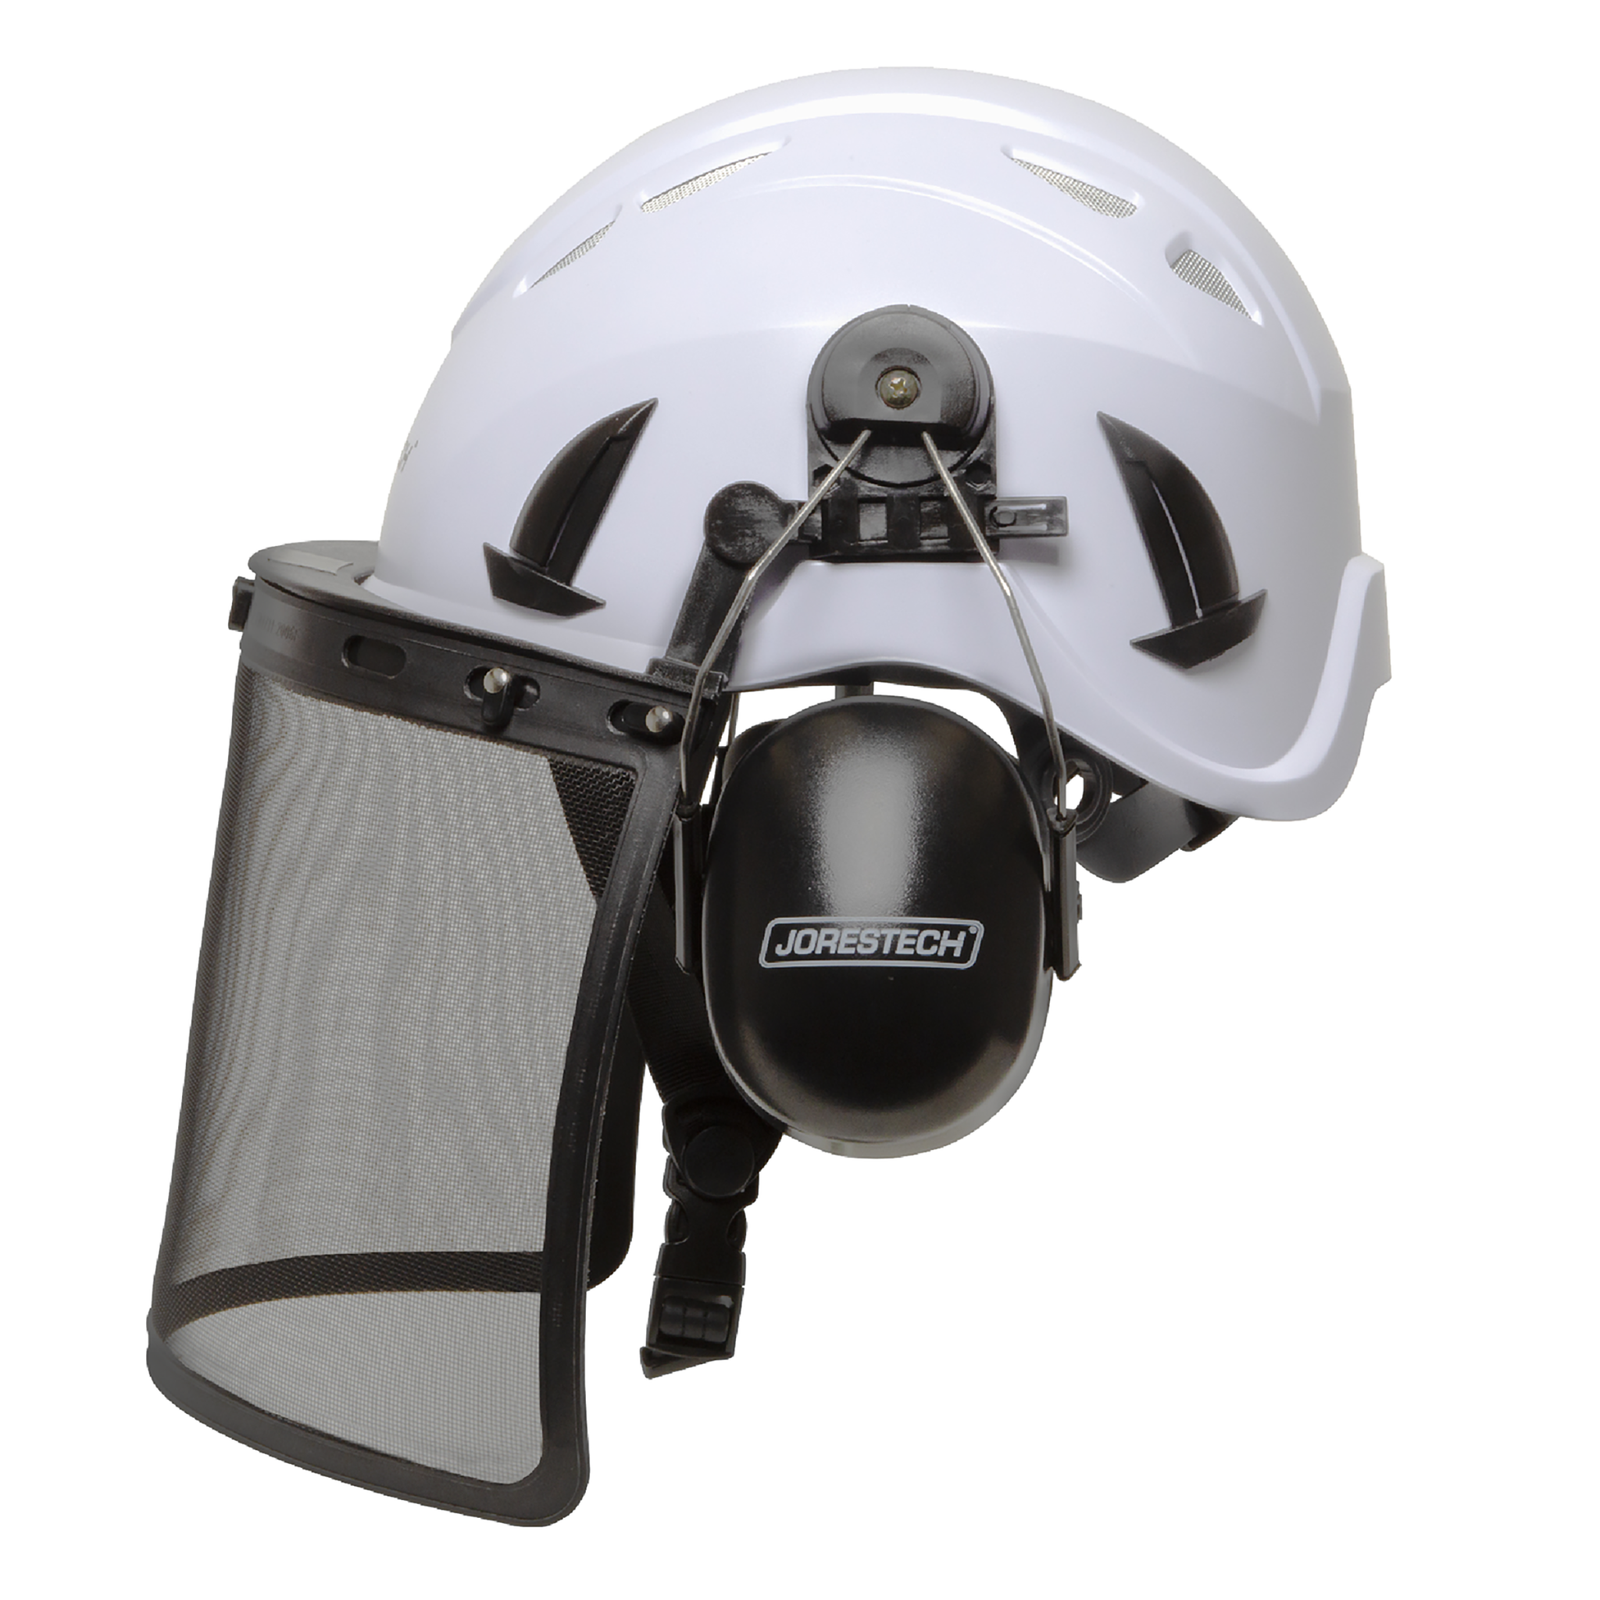 Side view of the white ventilated safety hard hat ANSI compliant class 1 Type C with iron face mesh shield and earmuffs